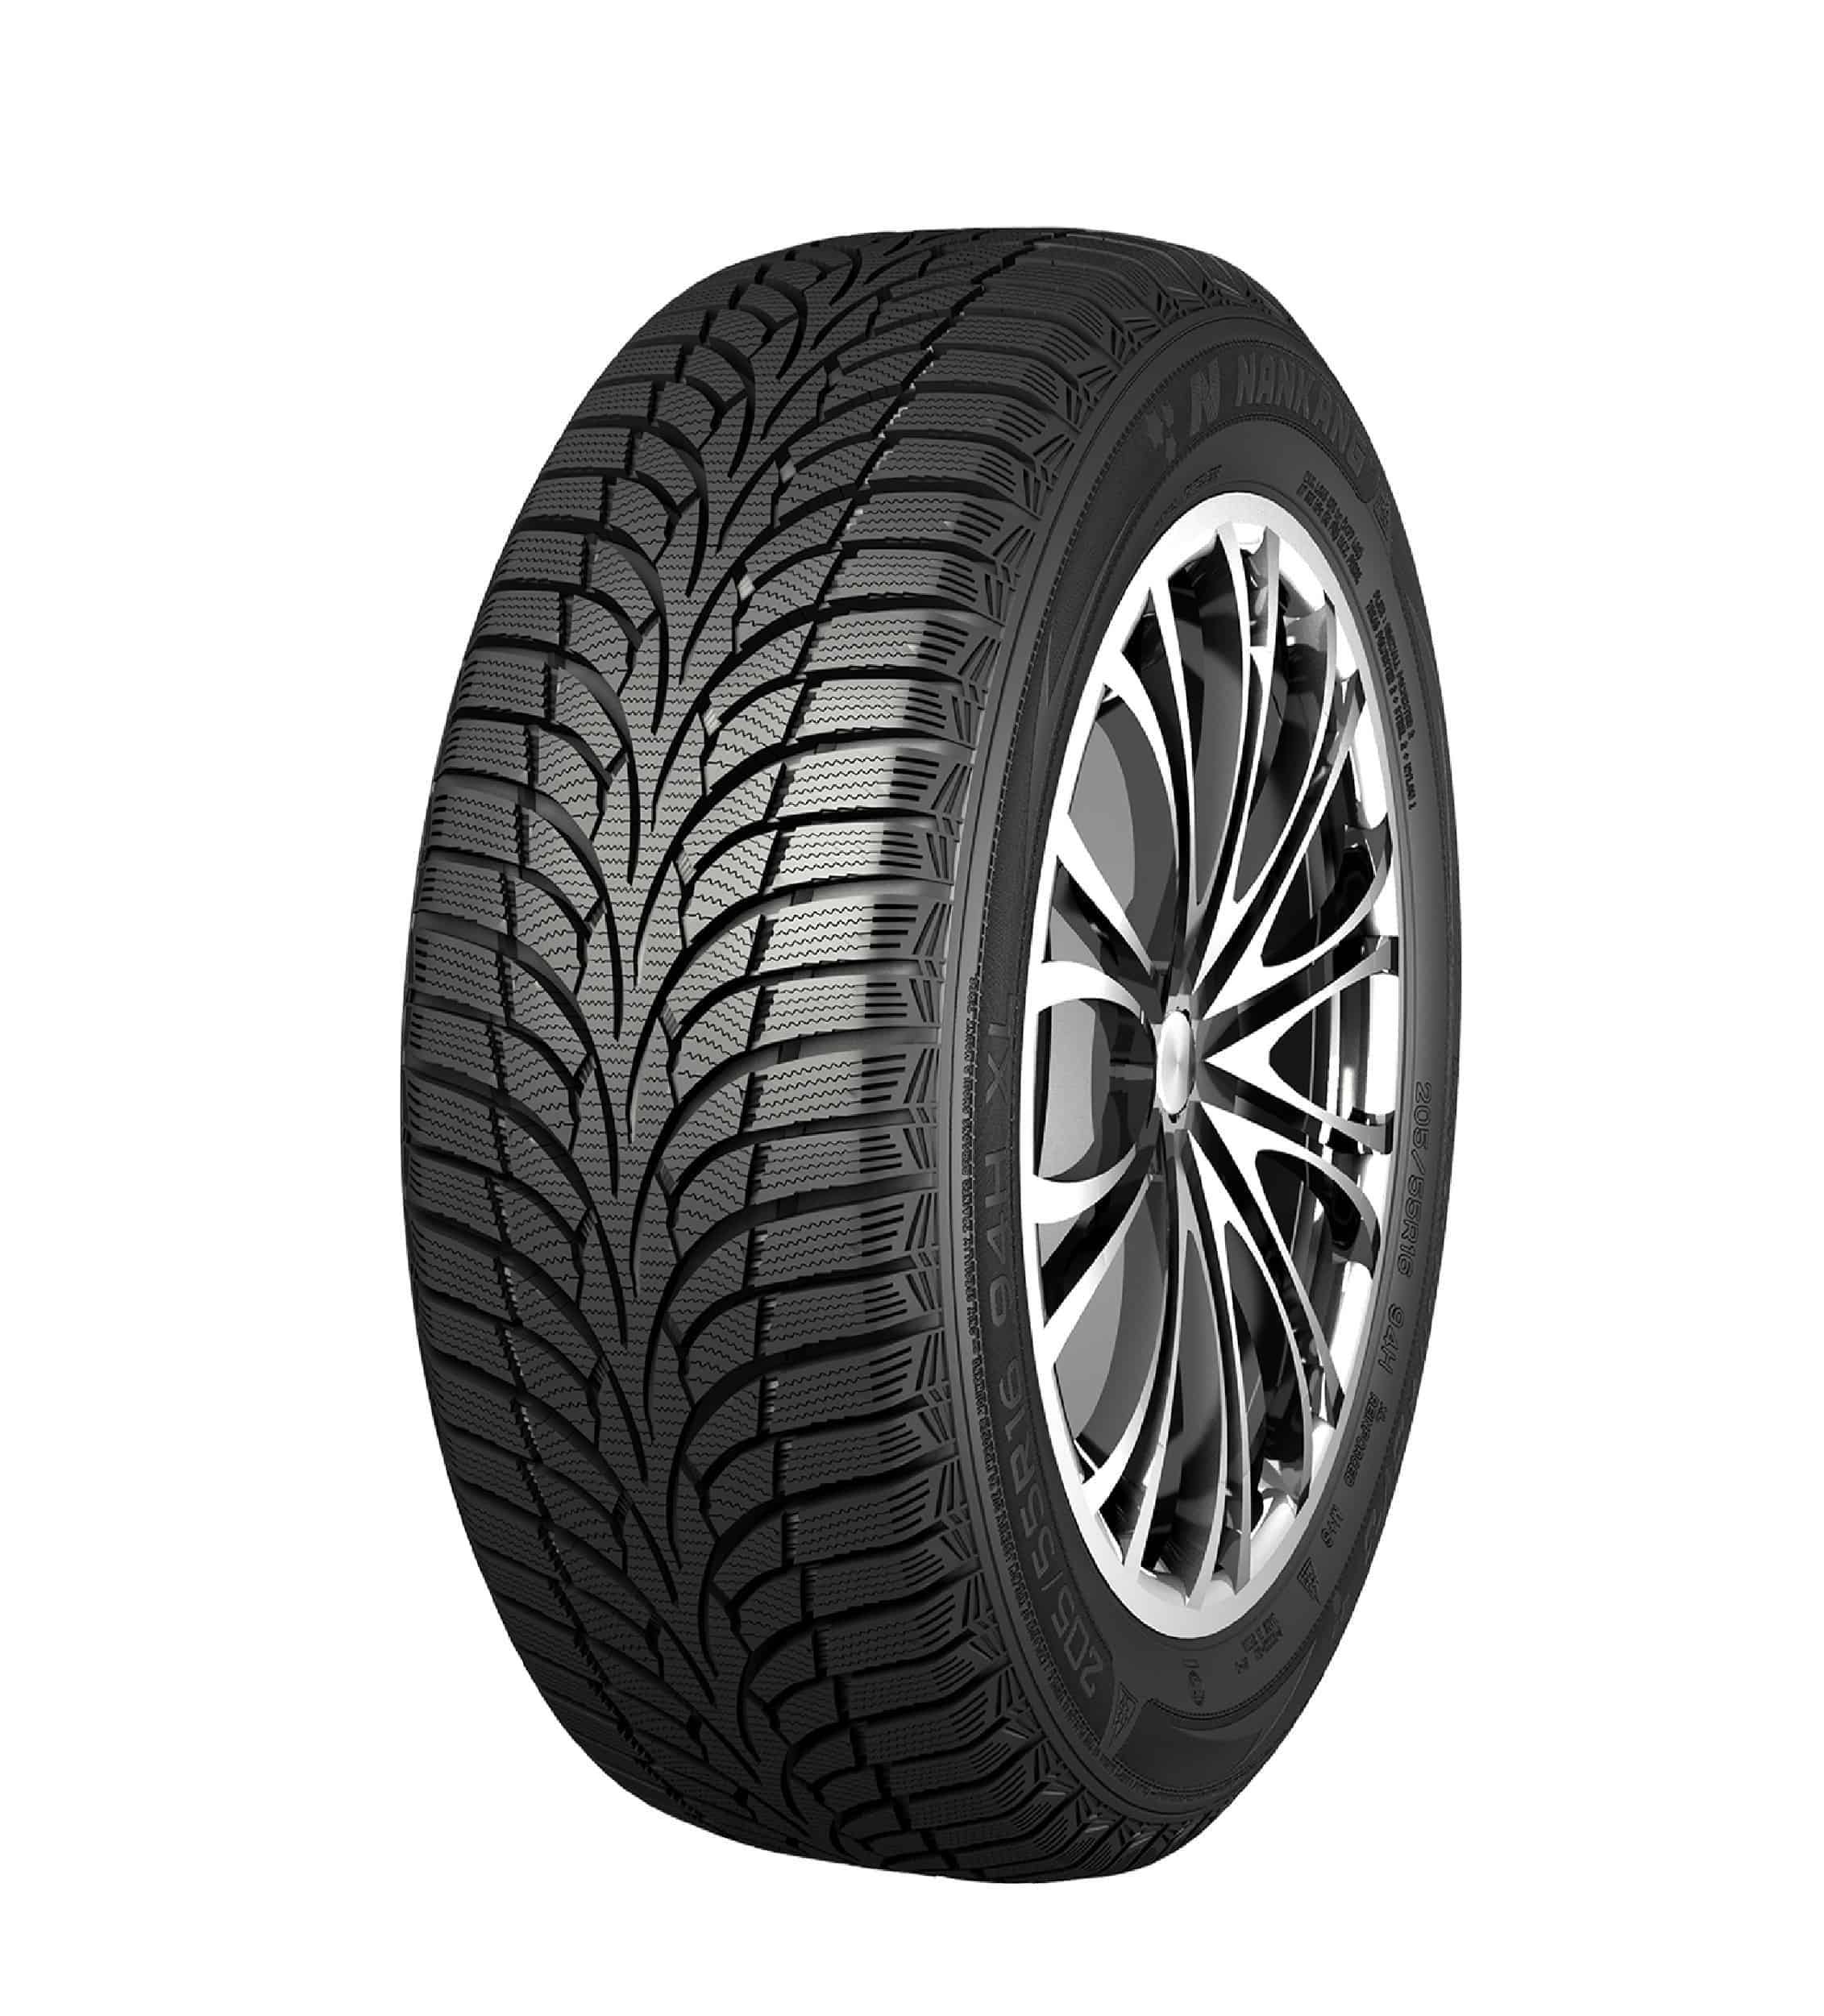 Gomme Nuove Nankang 175/60 R16 86H Winter Activa SV-3 XL M+S pneumatici nuovi Invernale